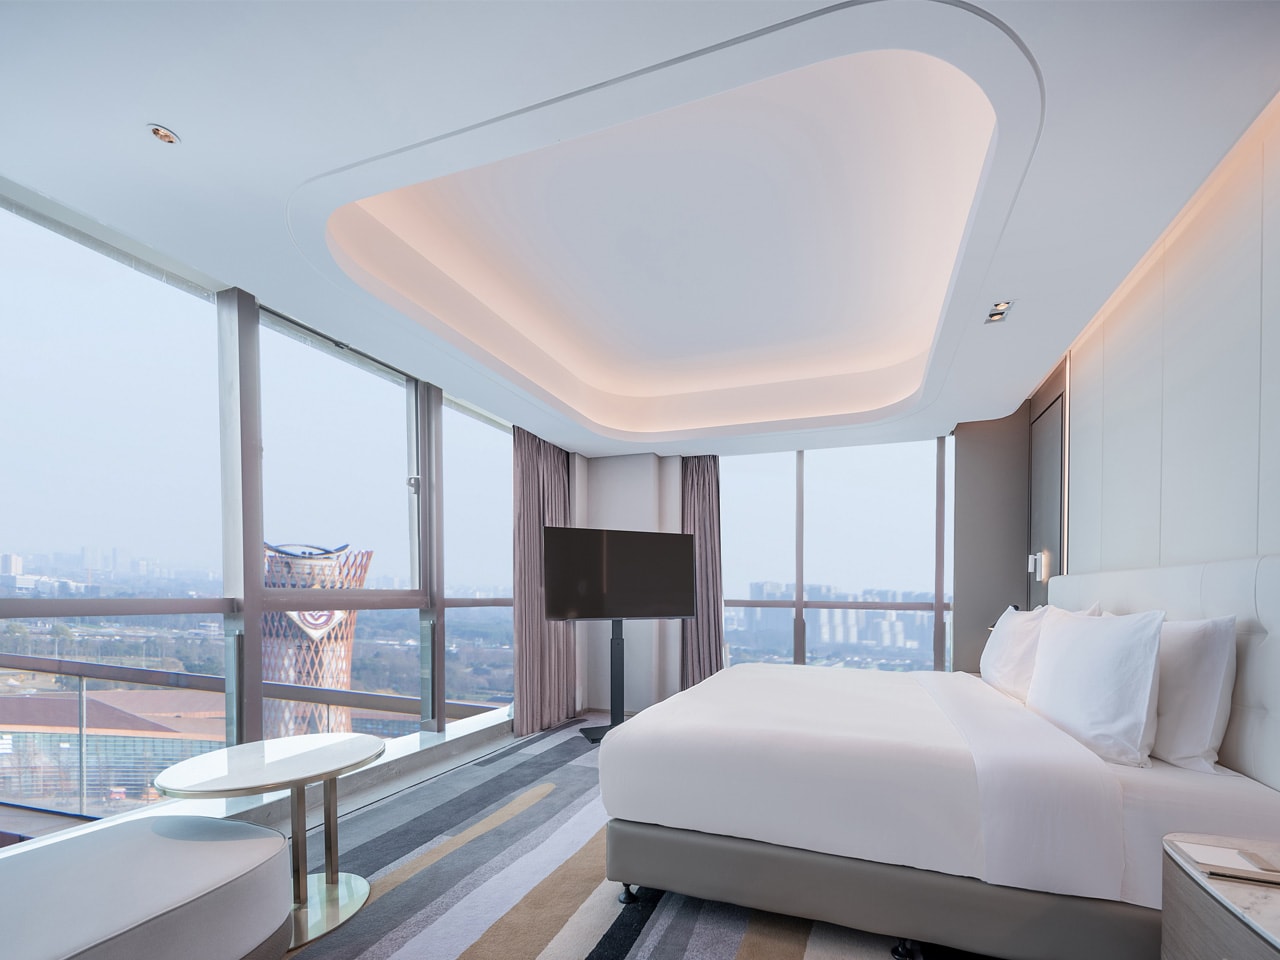 Minor Hotels Debuts Oaks Hotels, Resorts & Suites in China with the Opening of Oaks Chengdu at Cultural Heritage Park